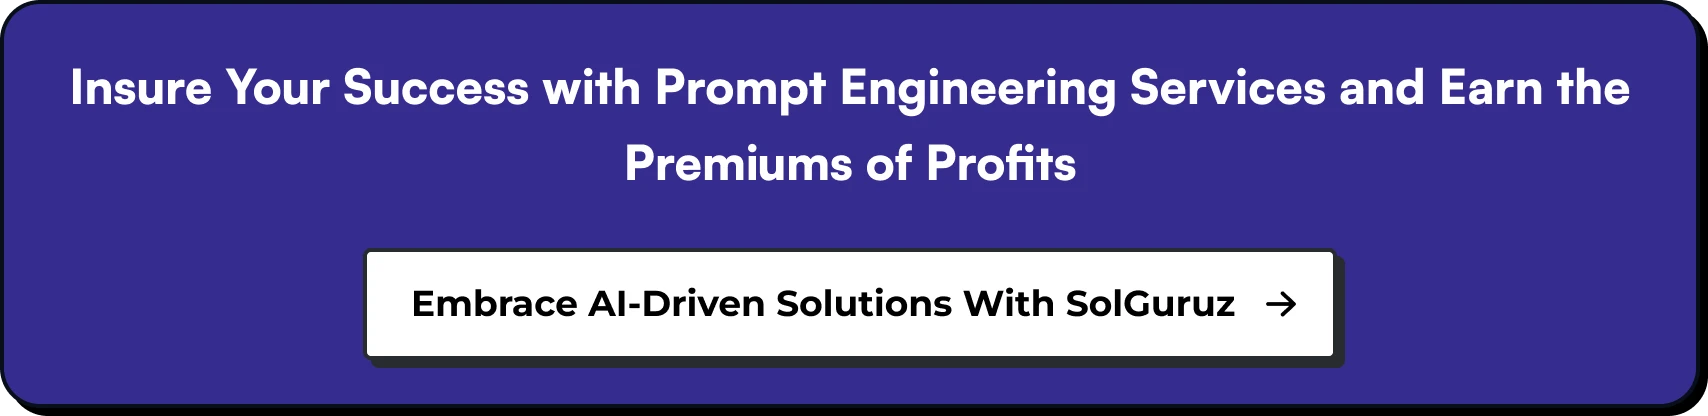 Insure Your Success with Prompt Engineering Services and Earn the Premiums of Profits